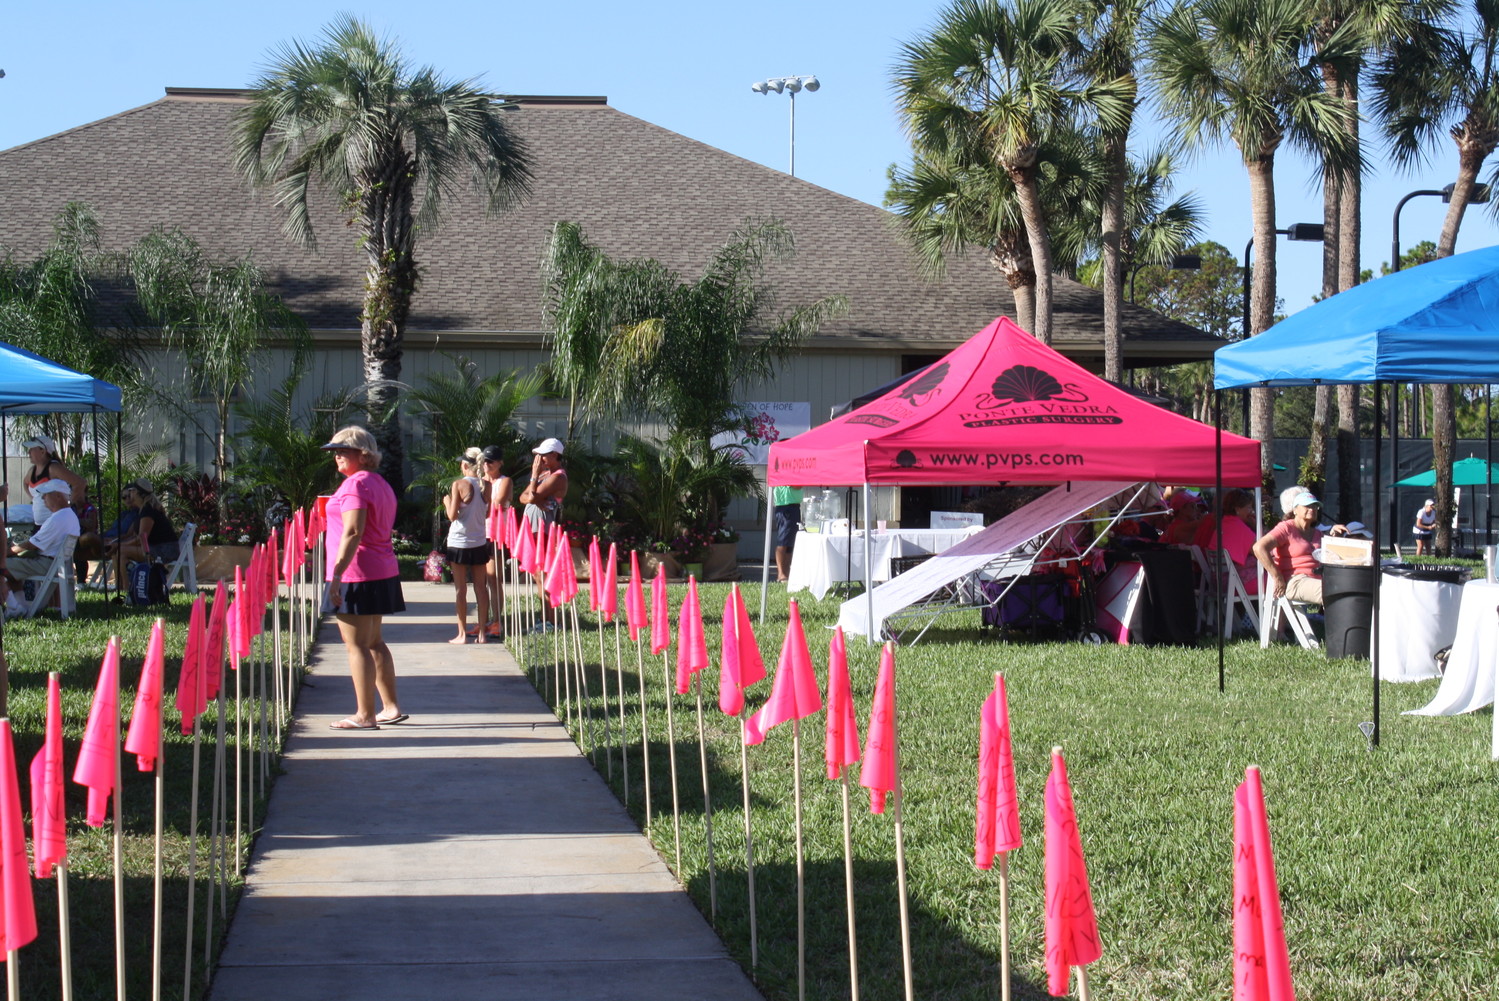 Pink flags line the walkway during the SenioRITAs tennis tournament at Sawgrass. The flags had names written on them in honor of breast cancer survivors and those lost to breast cancer.